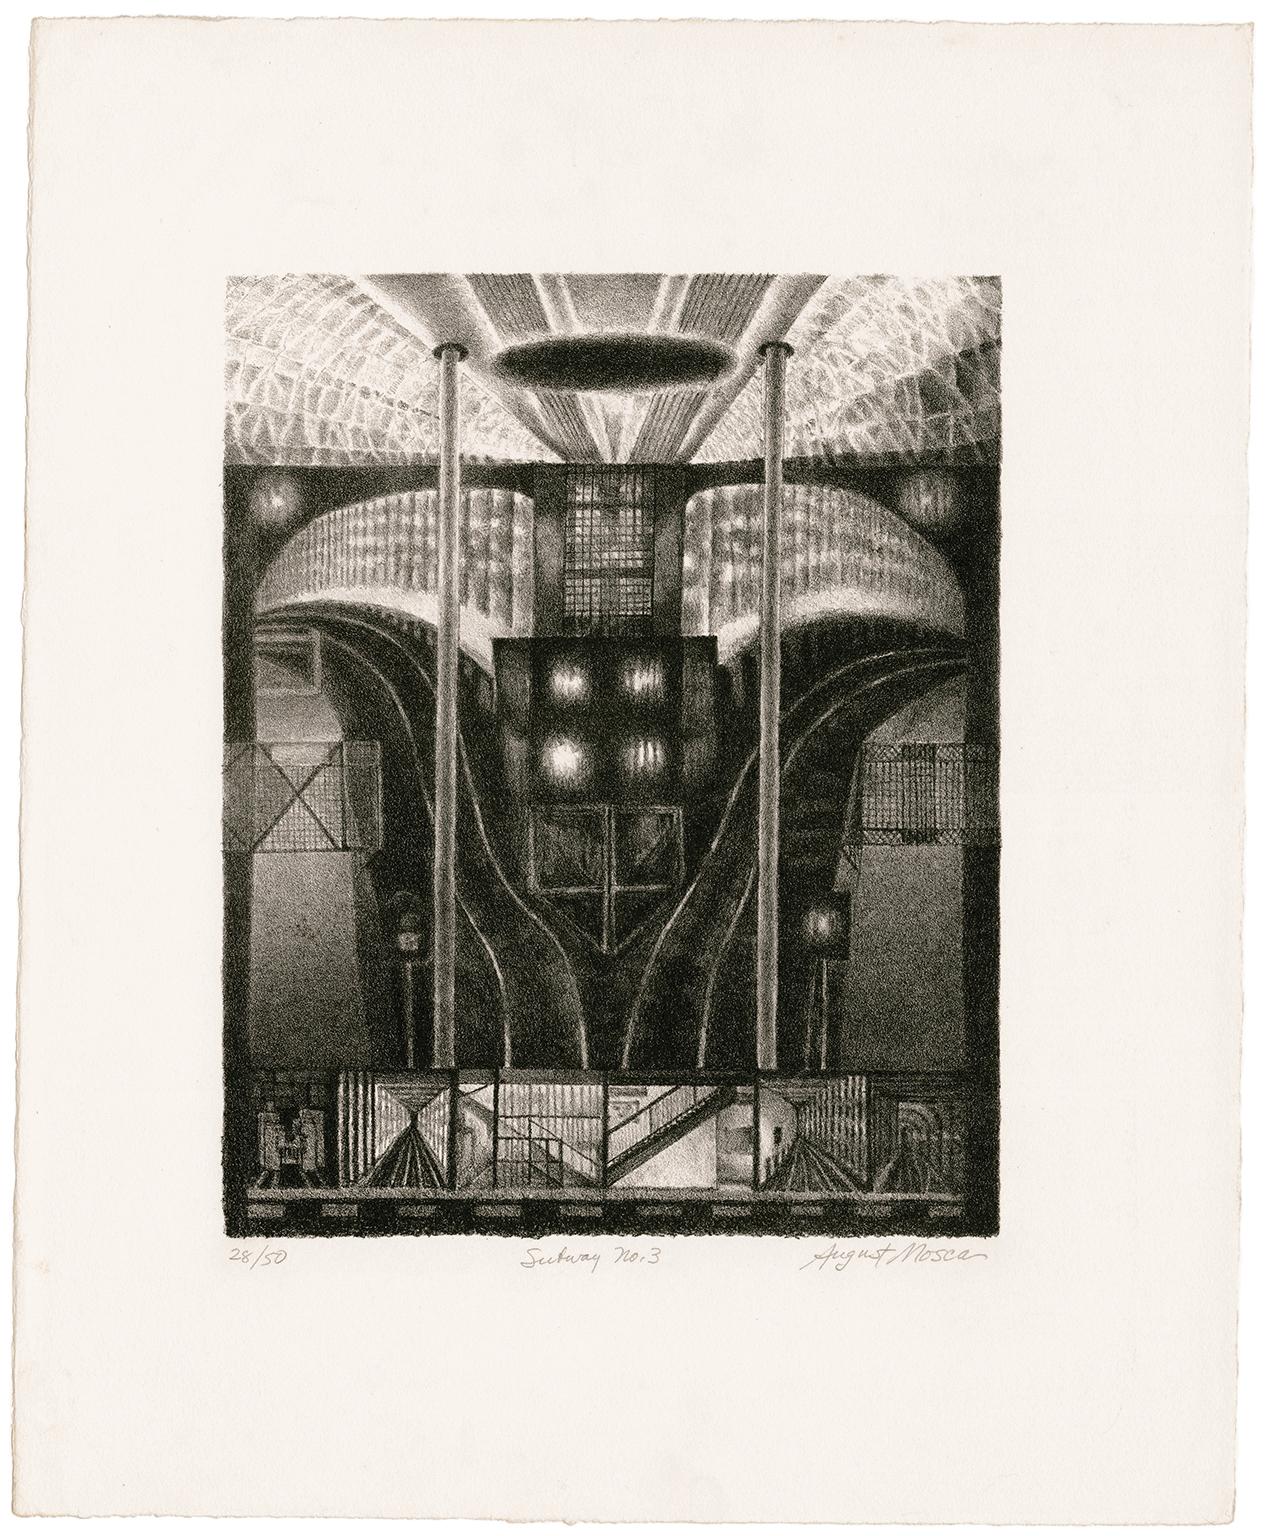 Subway No. 3 — Mid-century Modern - Print by August Mosca